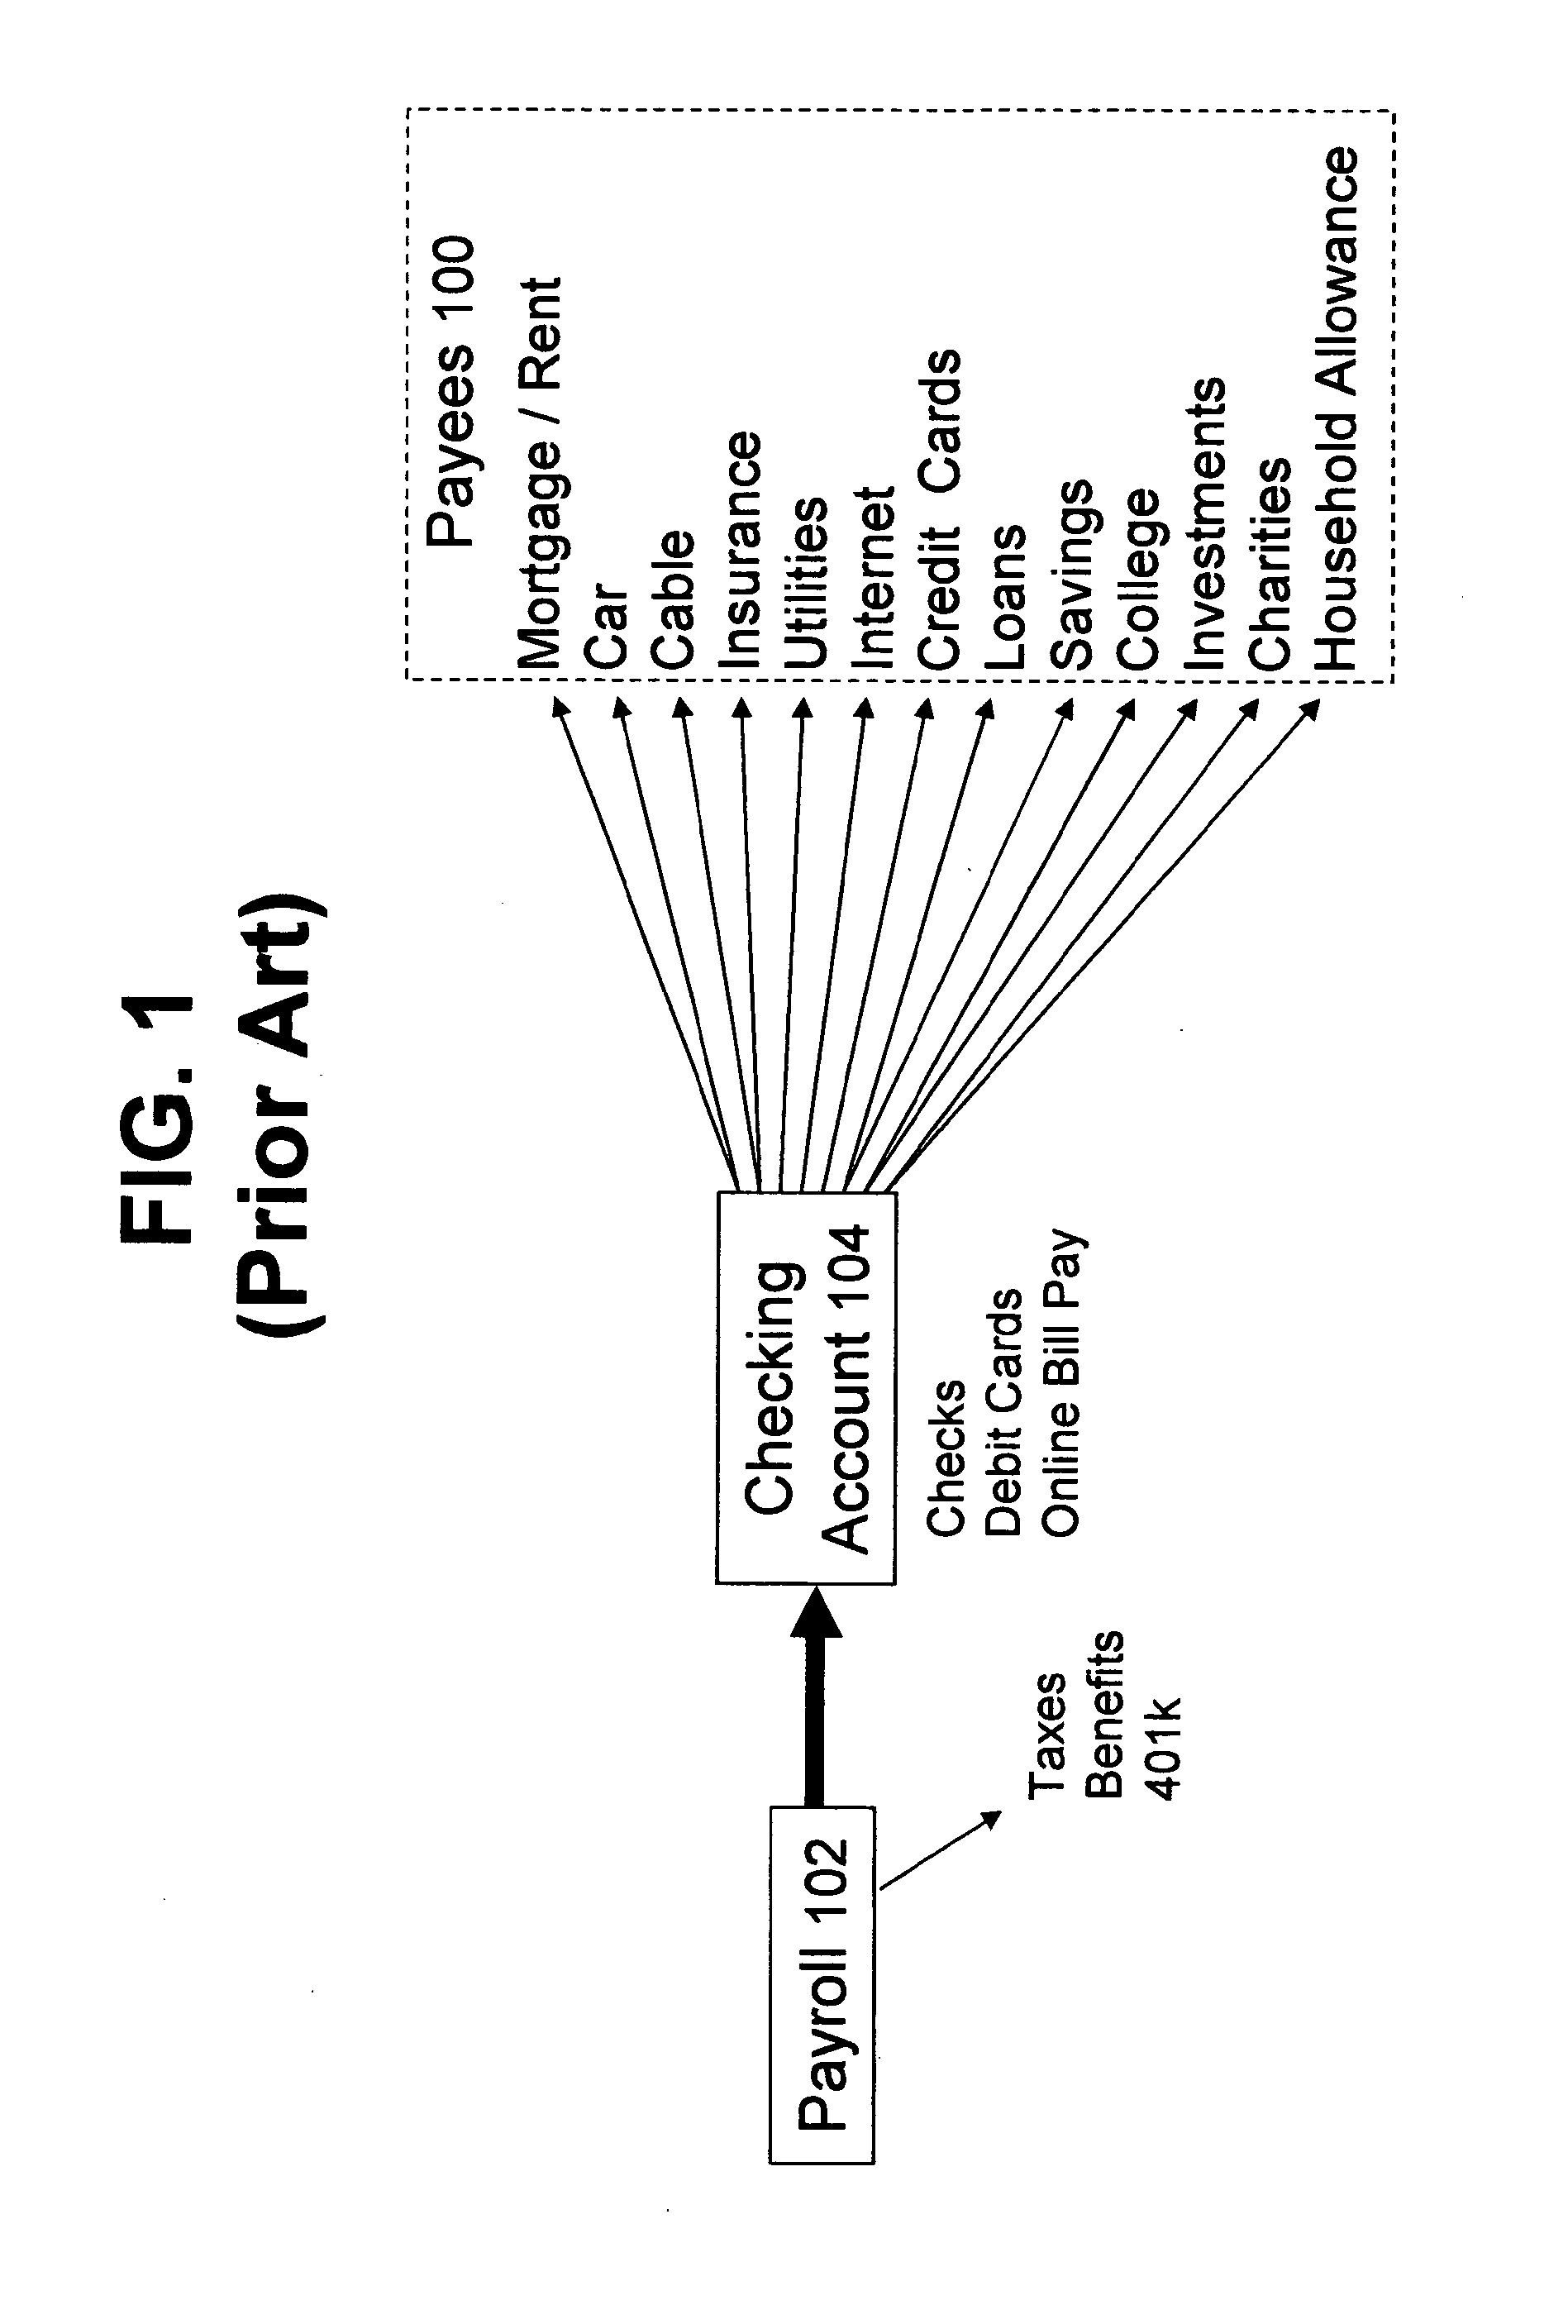 Funds transfer system and method